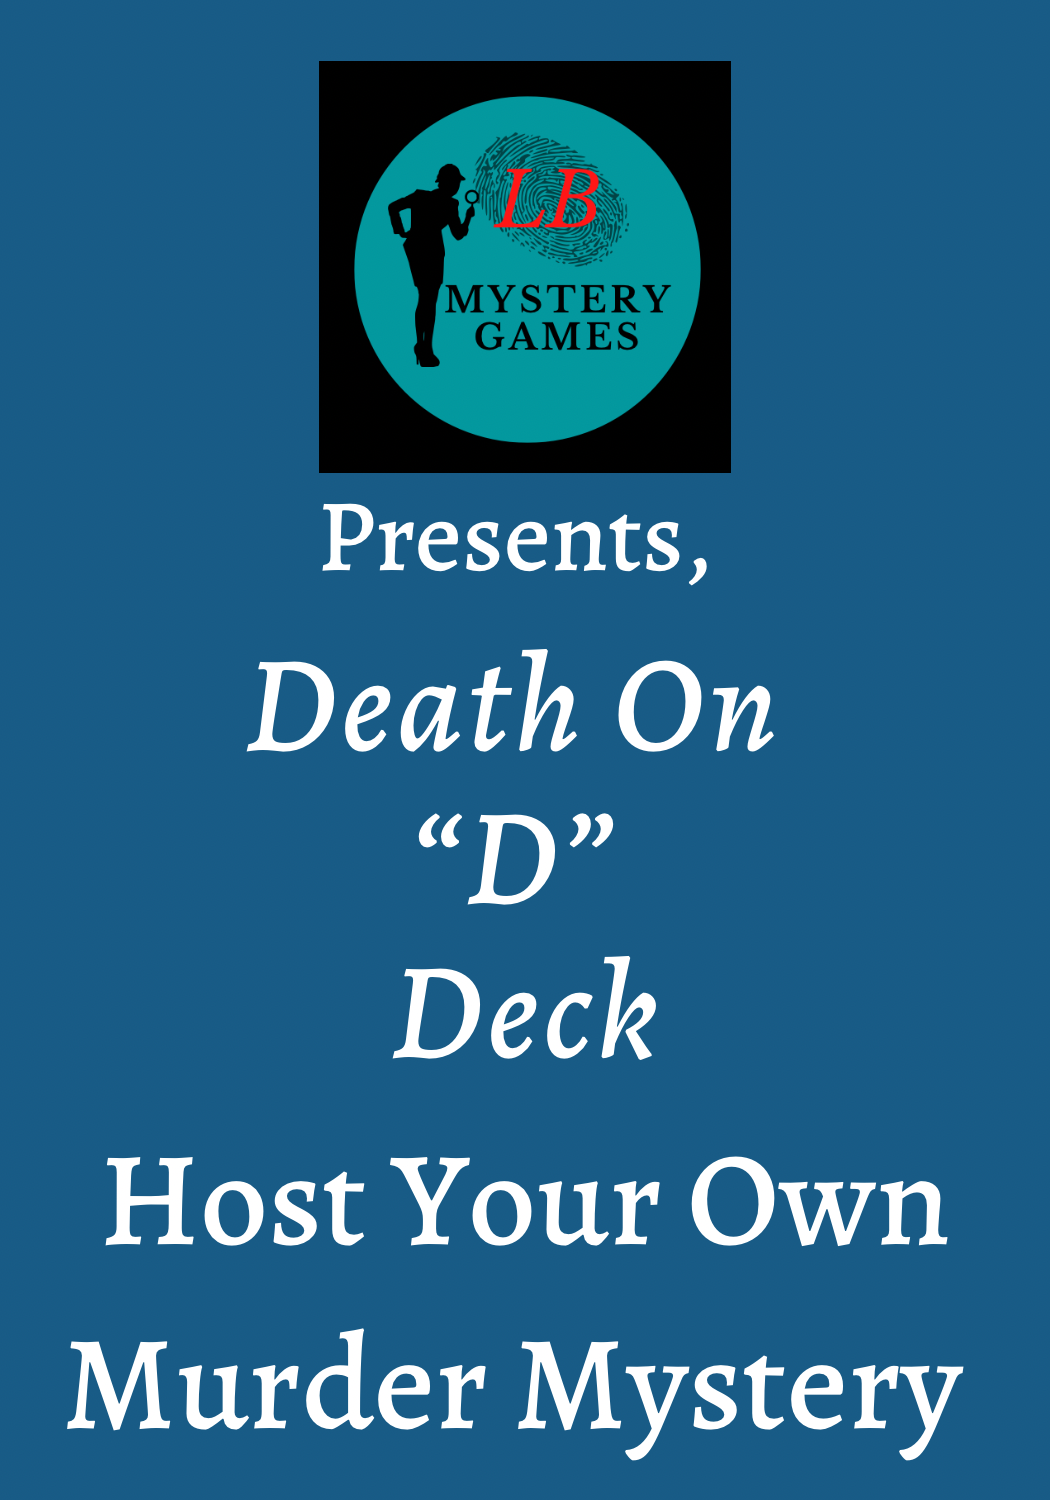 Host Your Own Murder Mystery Game